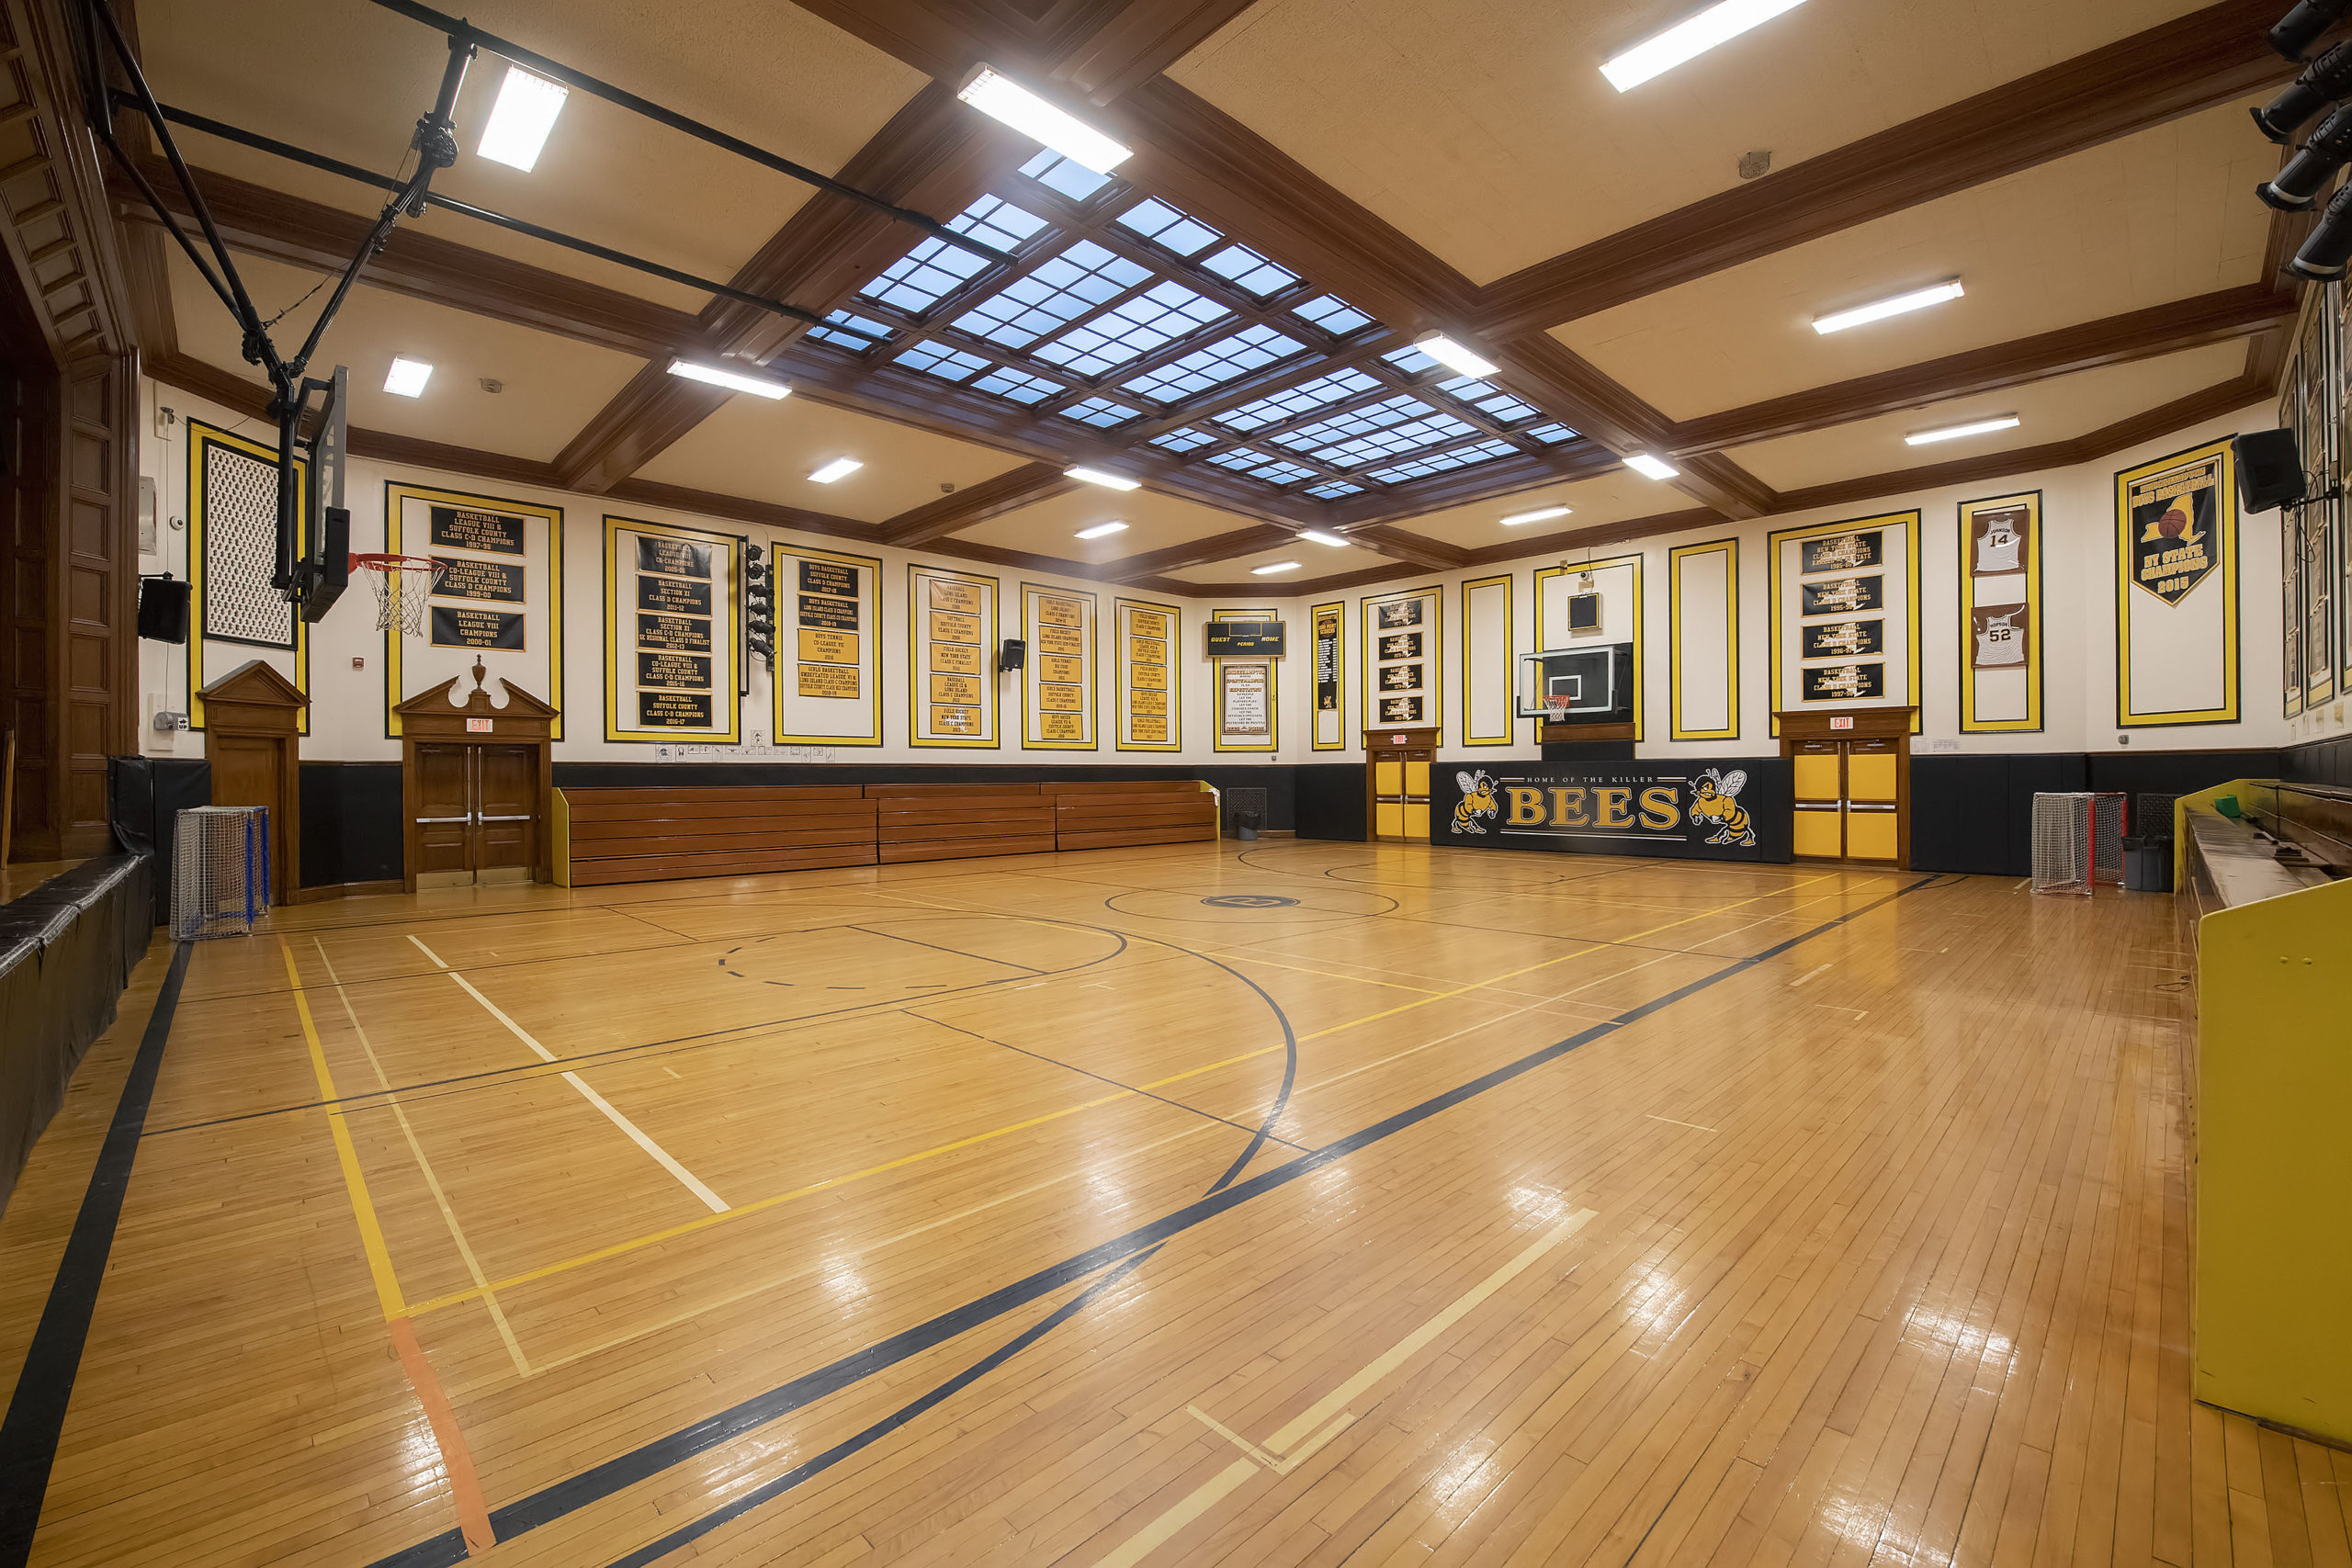 The Hive measures 37 feet sideline to sideline and 55 feet baseline to baseline, 13 feet and 19 feet smaller, respectively, than a regulation-sized high school basketball court.